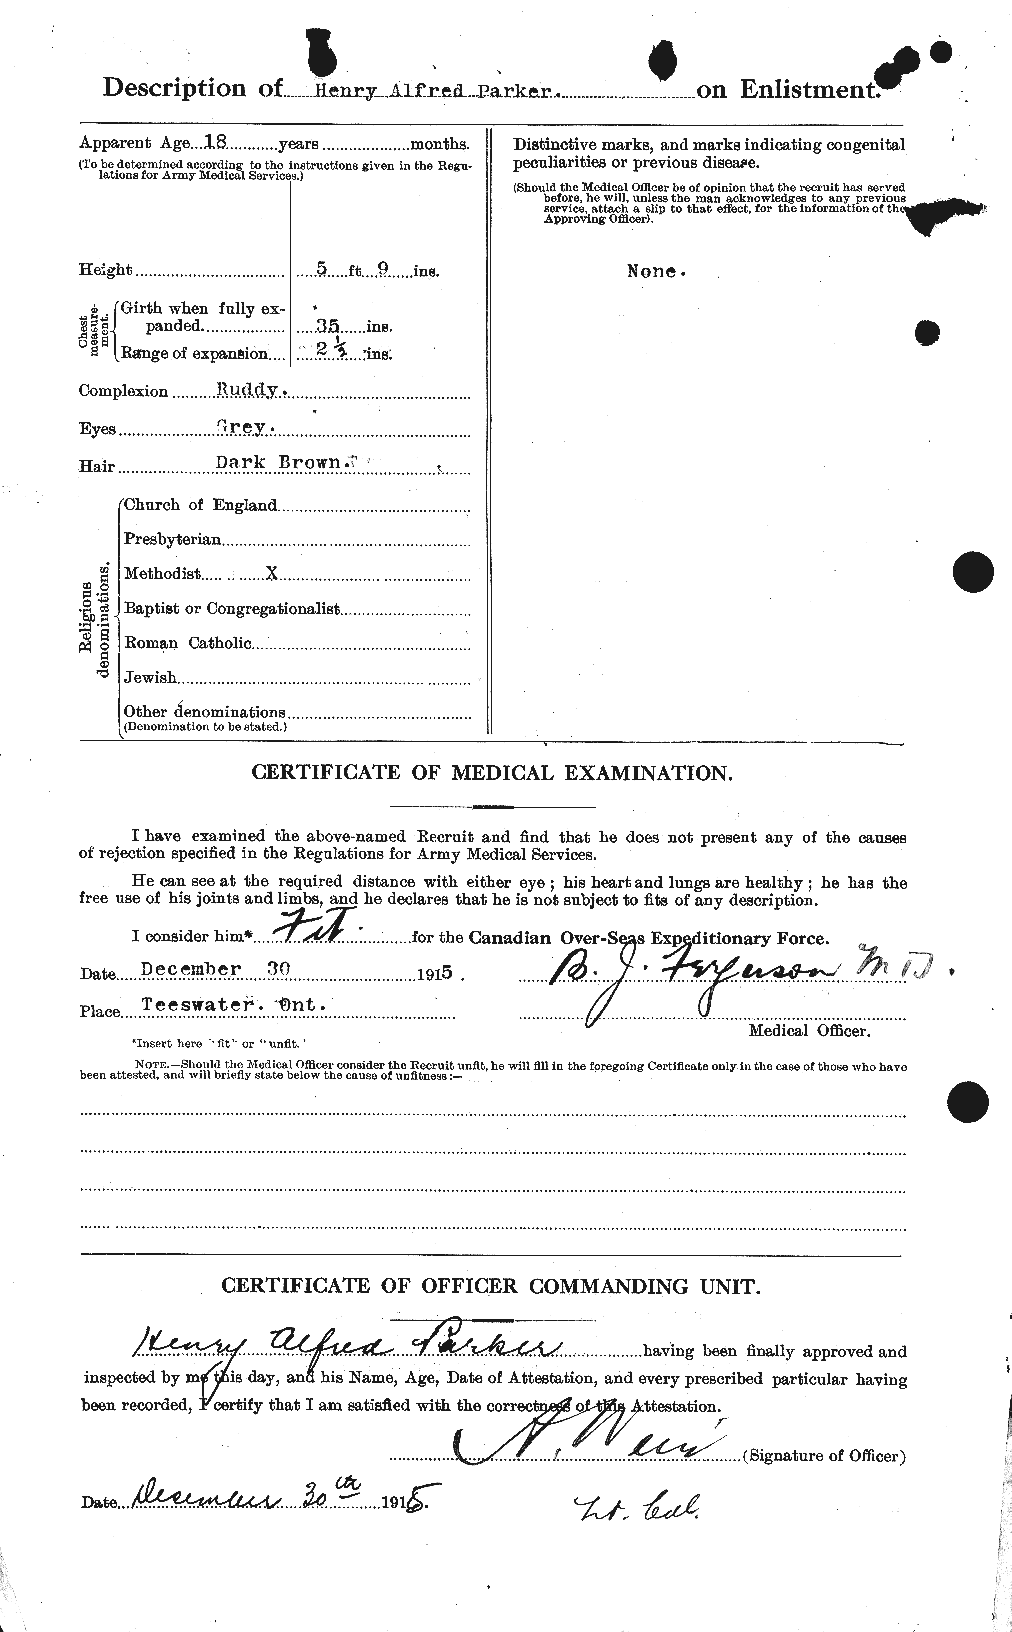 Personnel Records of the First World War - CEF 565348b